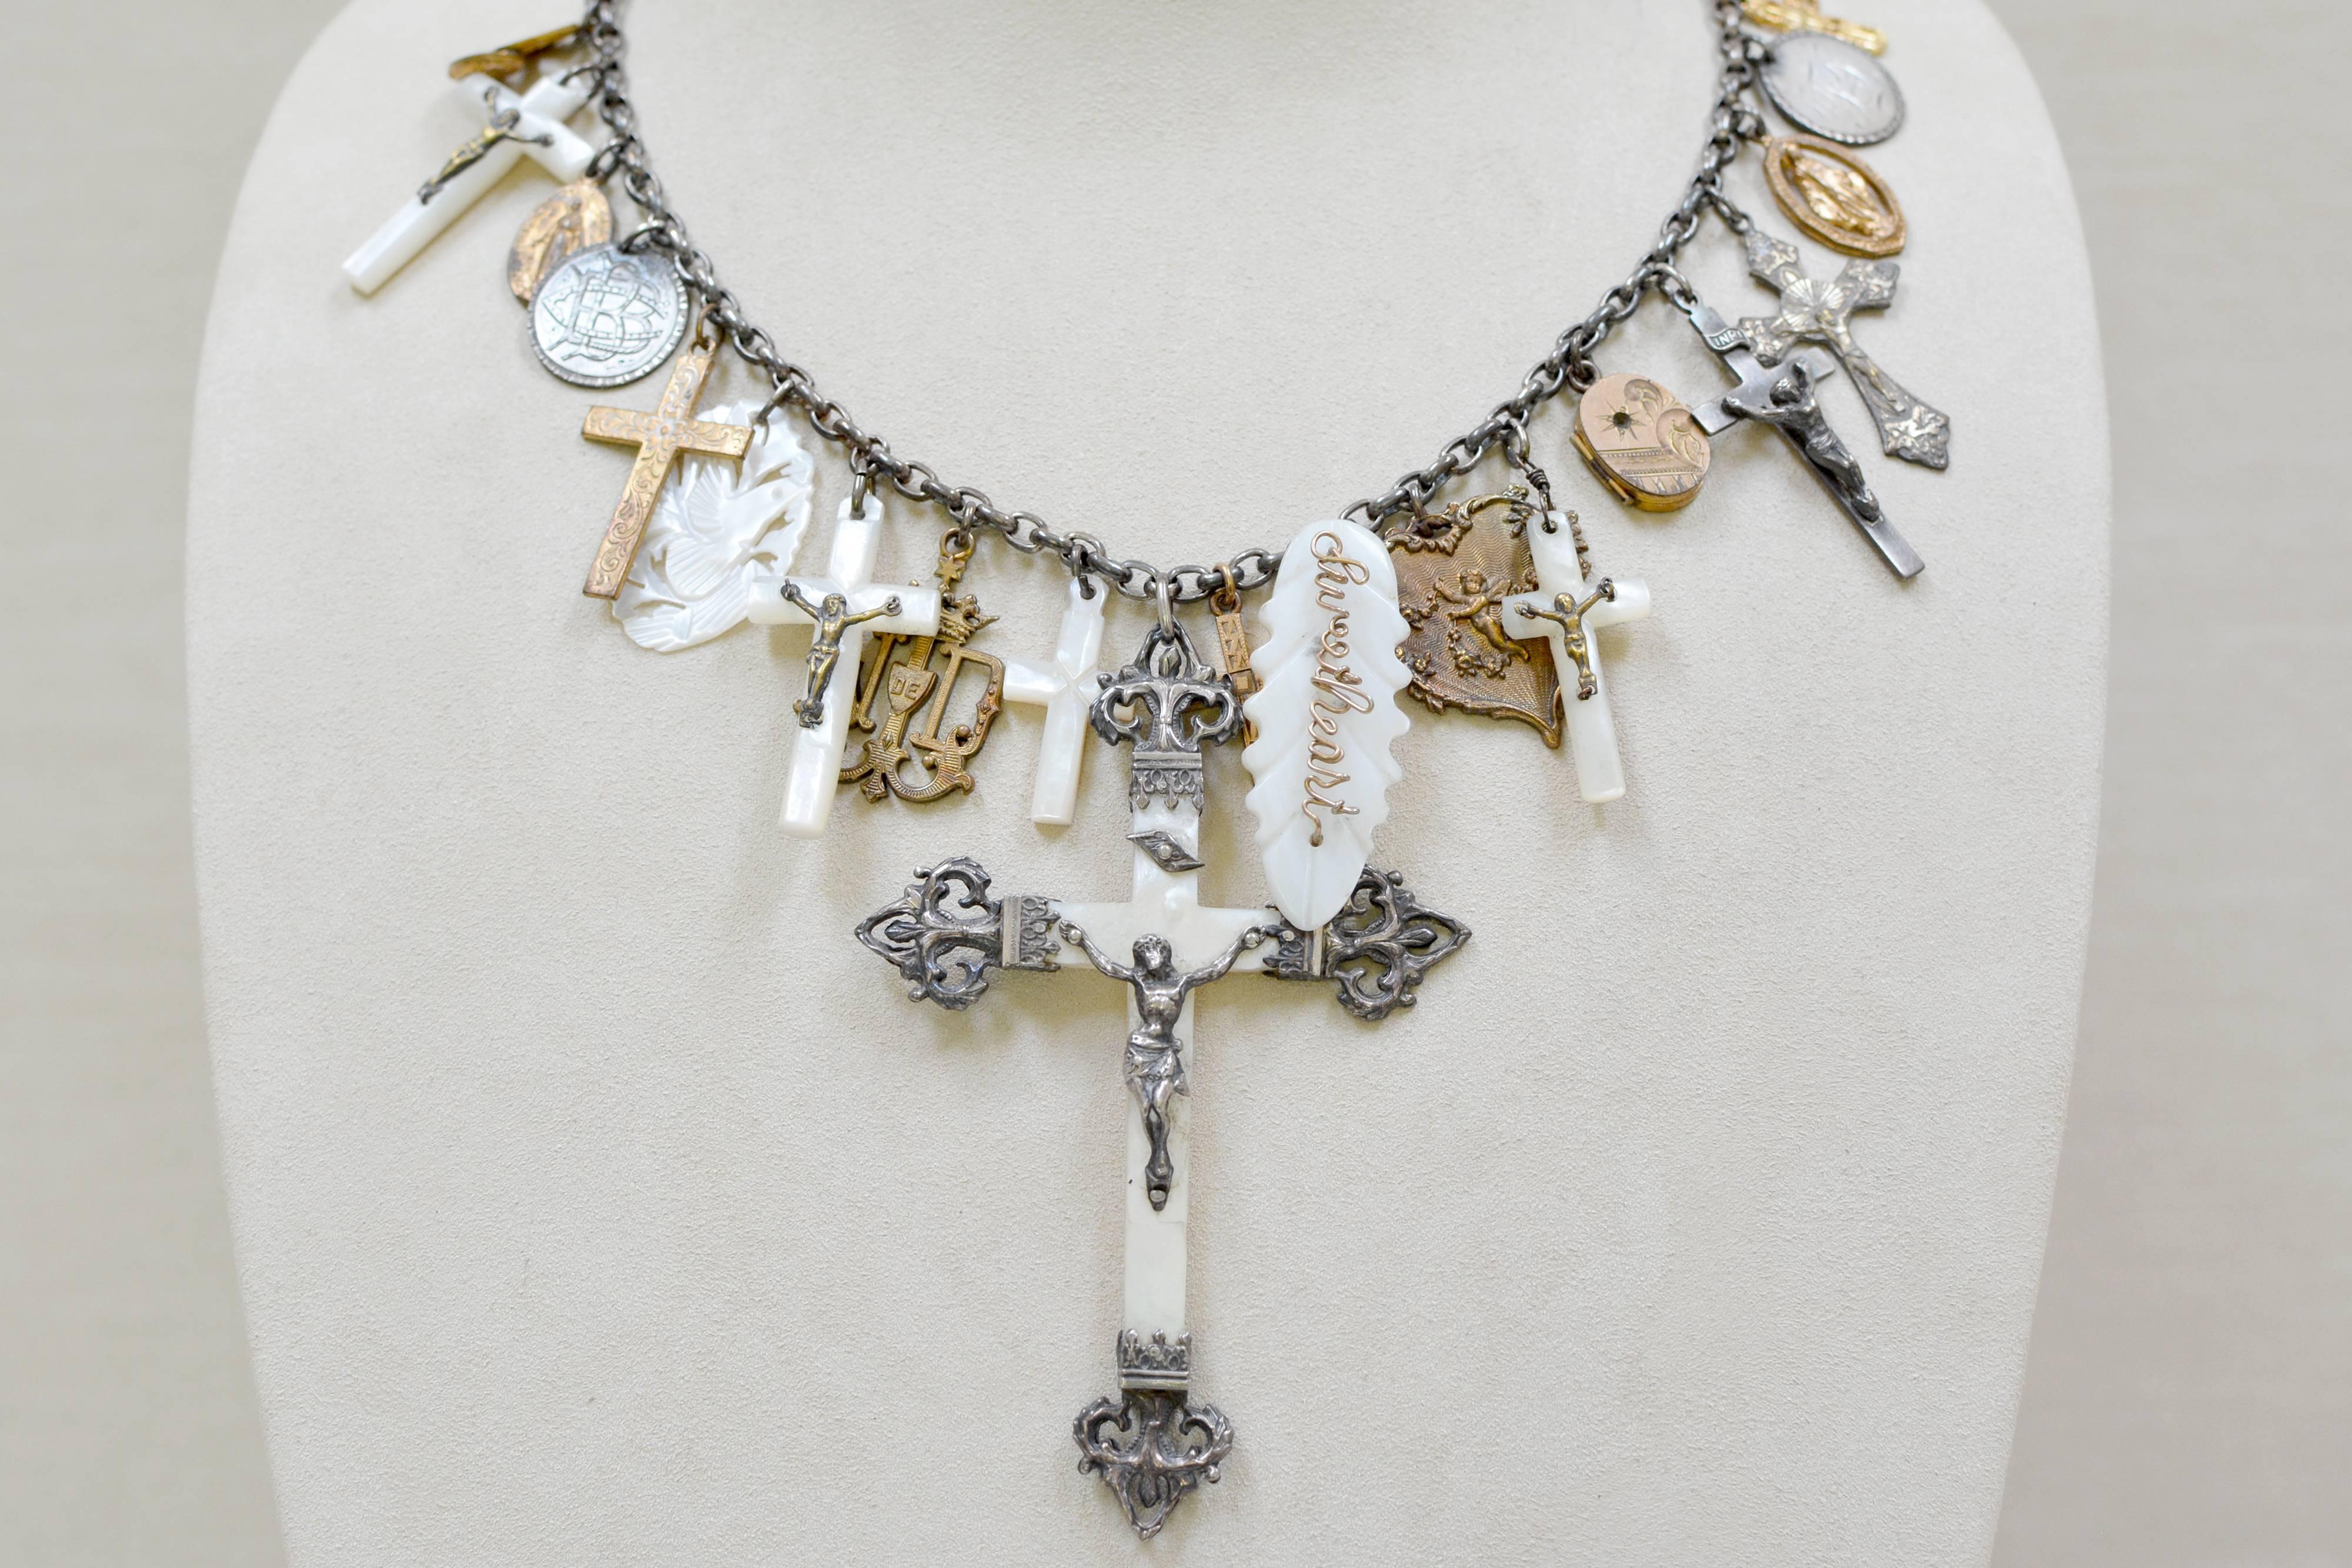 At the center of this one of a kind Love Token Festoon necklace is a grande antique nineteenth century Mother-of-Pearl, sterling filigree French Christening cross. Meticulously curated, iconic treasures abound on a vintage sterling silver chain.